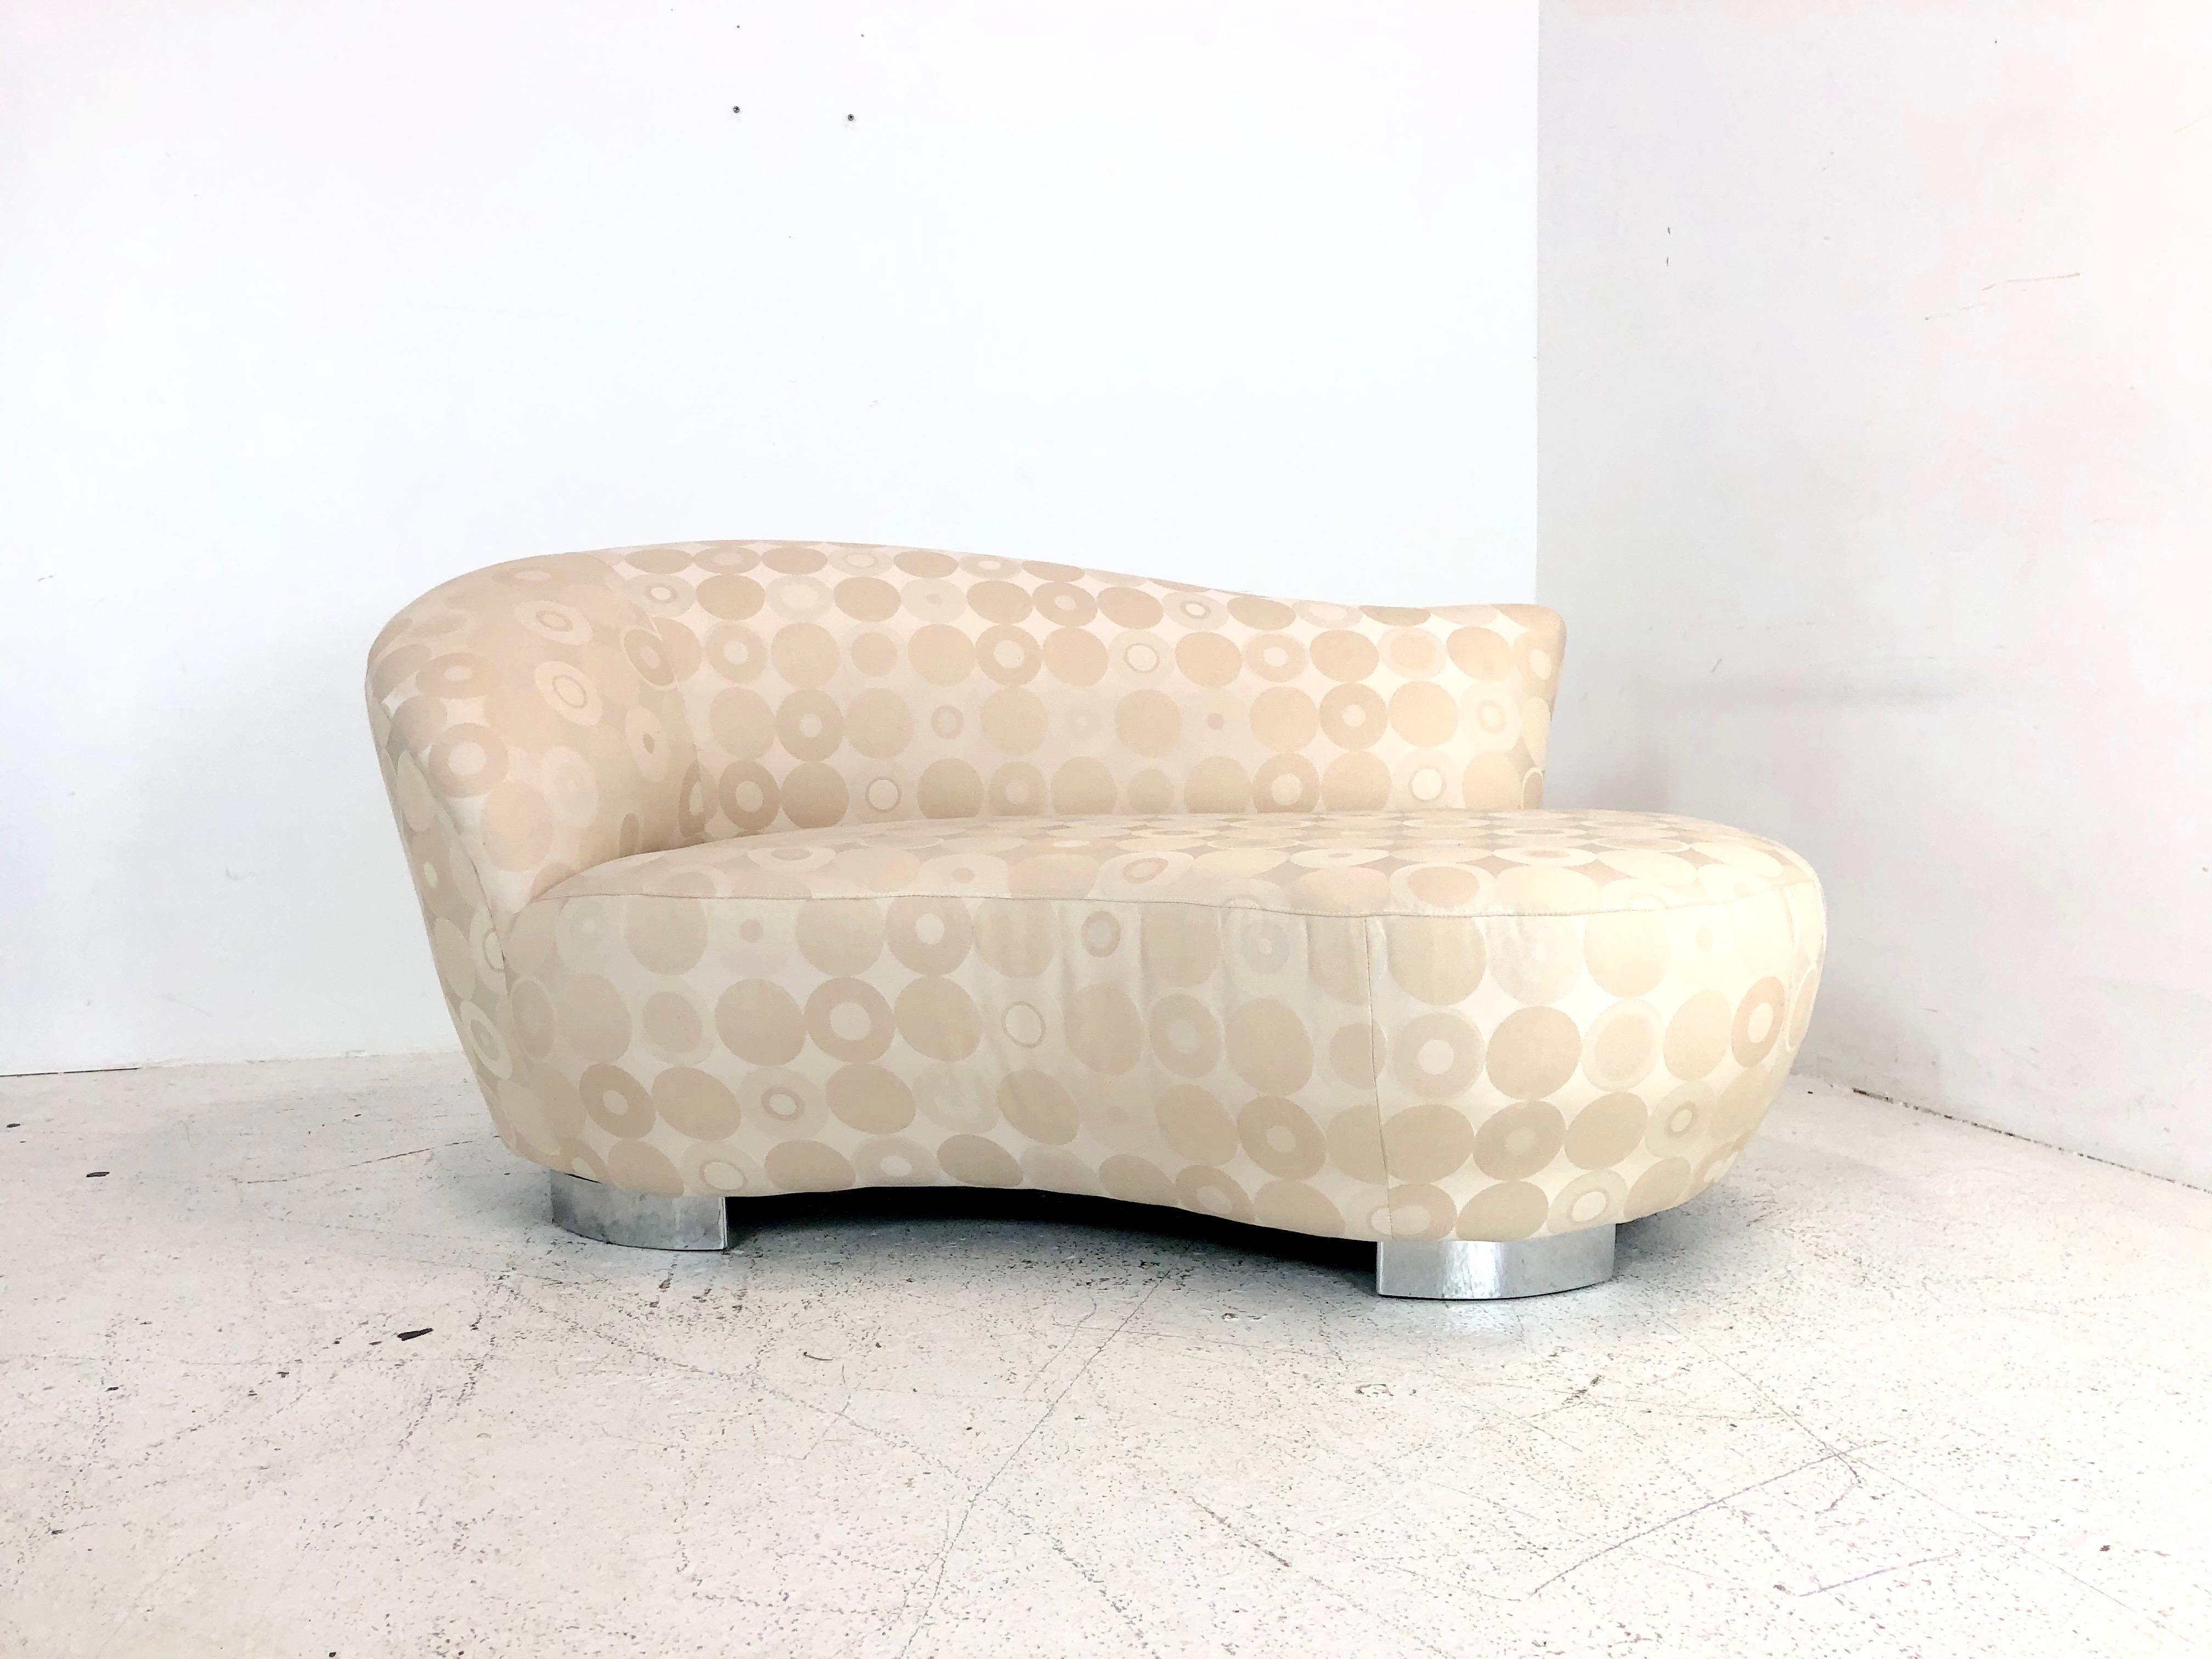 Petite Cloud Chaise/Loveseat/Sofa by Vladimir Kagan for Weiman. Sofa is in good vintage condition with minimal wear from use and age.
Dimensions:
63 W x 36 D x31 H
seat height 17